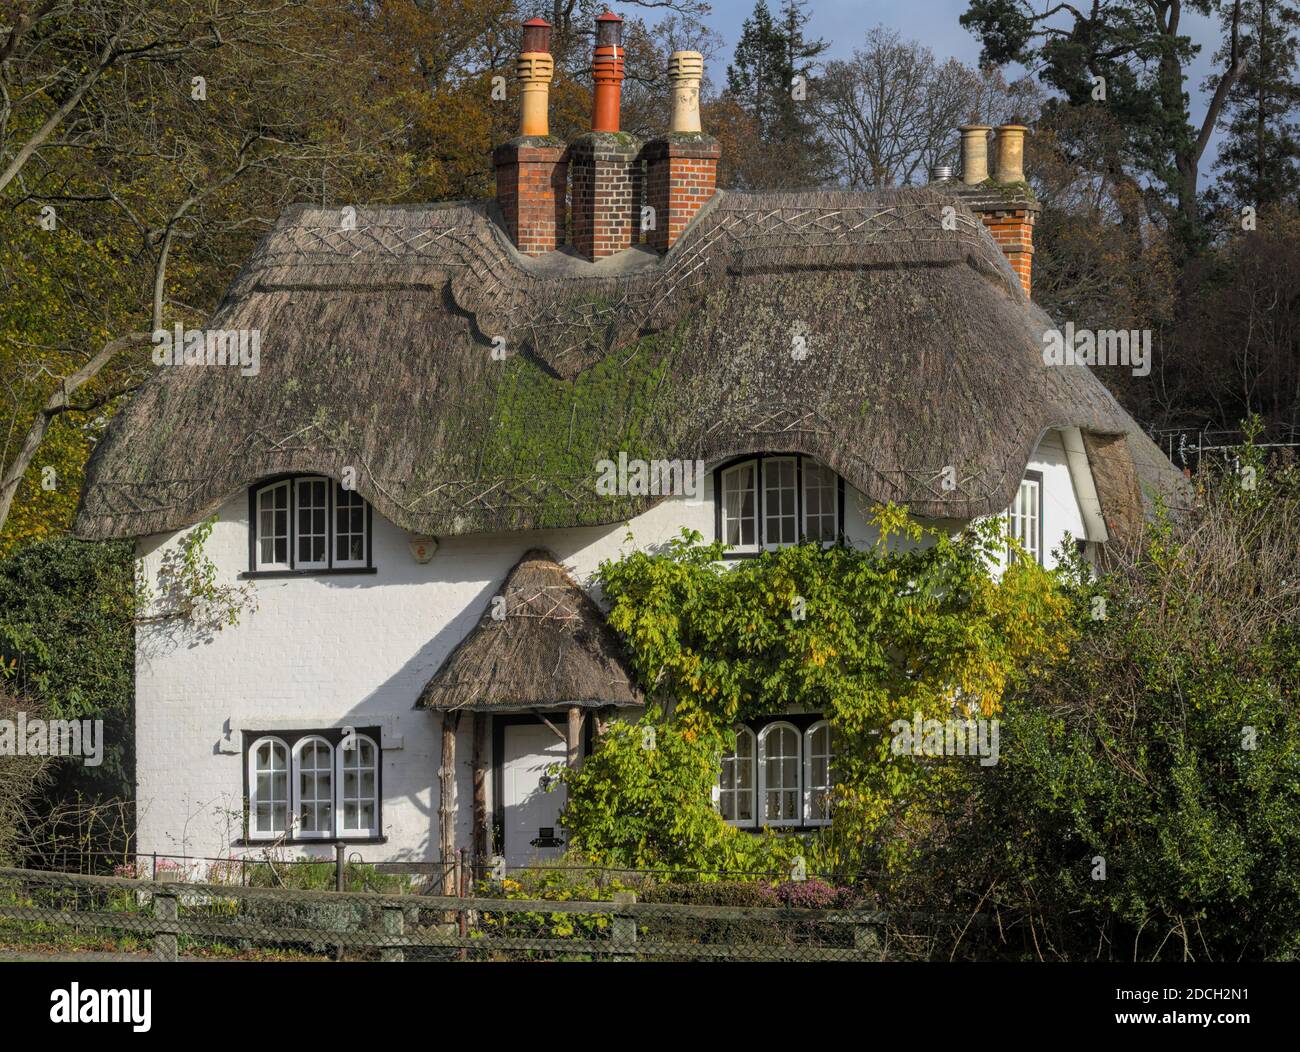 Front Of Beehive Cottage With Wisteria English 18th Century Thatched Cottage, Grade 2 Listed. Swan Green Cottages, New Forest, Lyndhurst UK Stock Photo